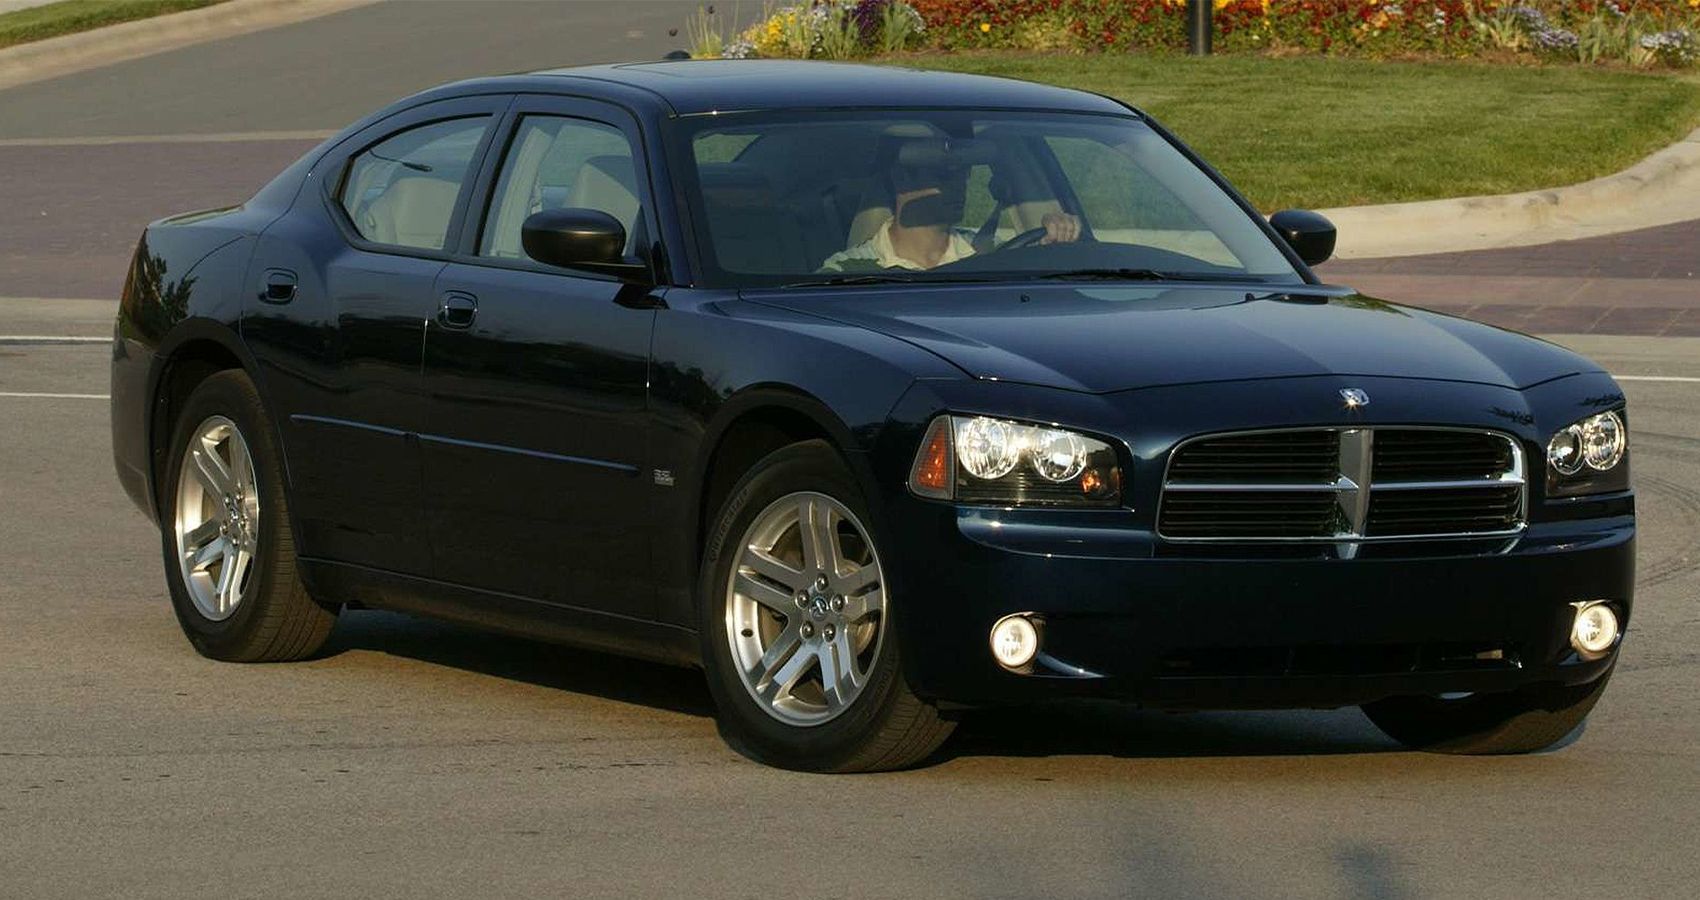 These Are The Best Sixth-Gen Dodge Charger Trims To Buy